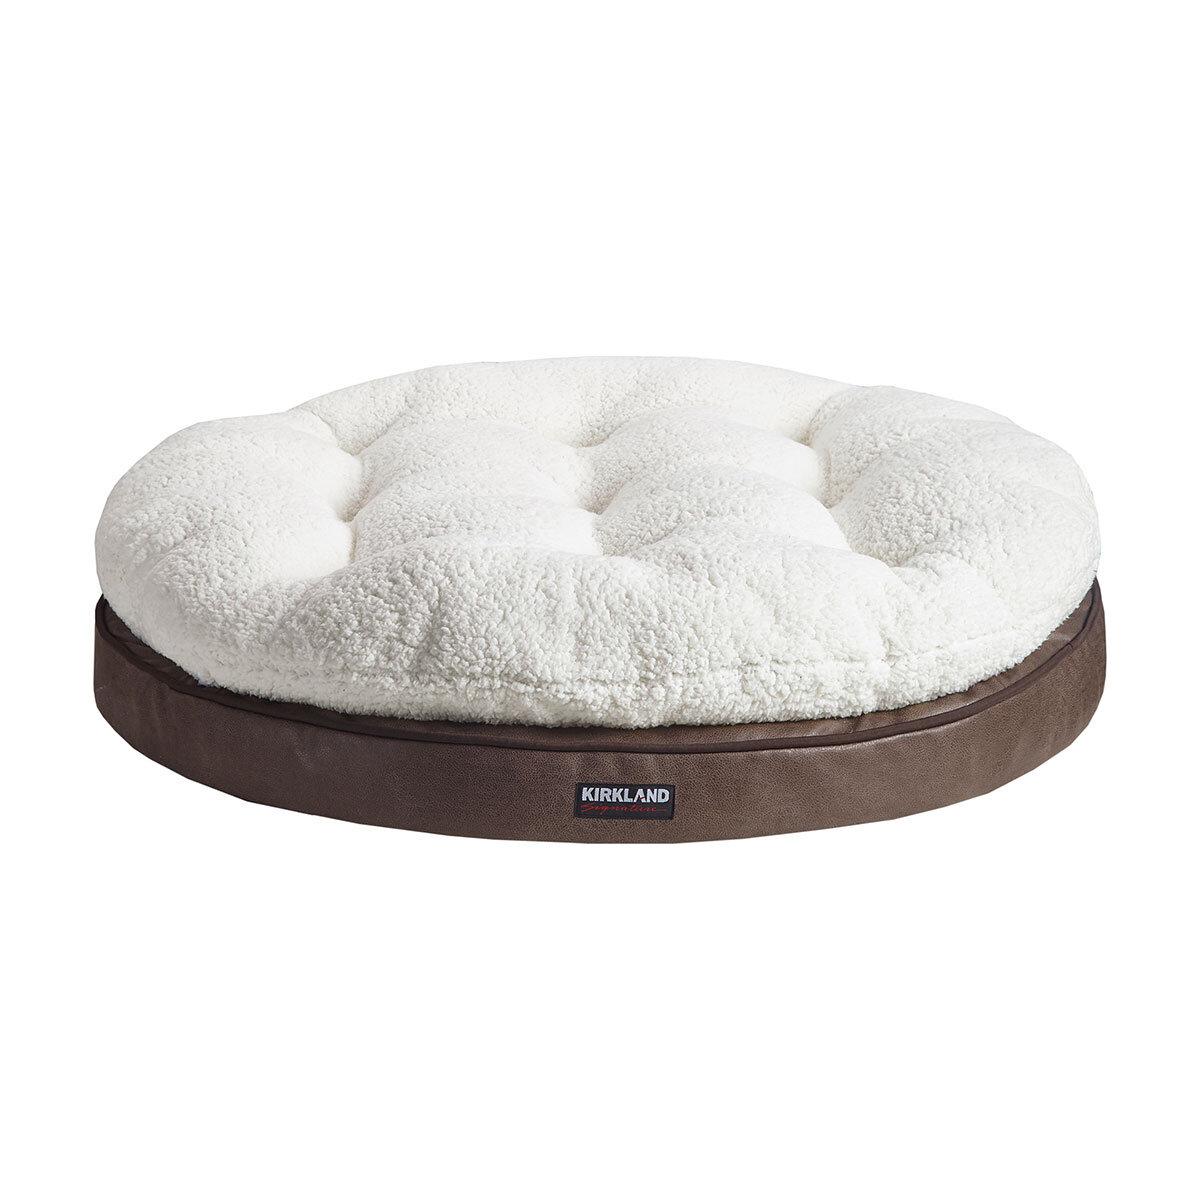 Kirkland Signature Round Pillow Orthopaedic Dog Bed, Brown with Faux Leather